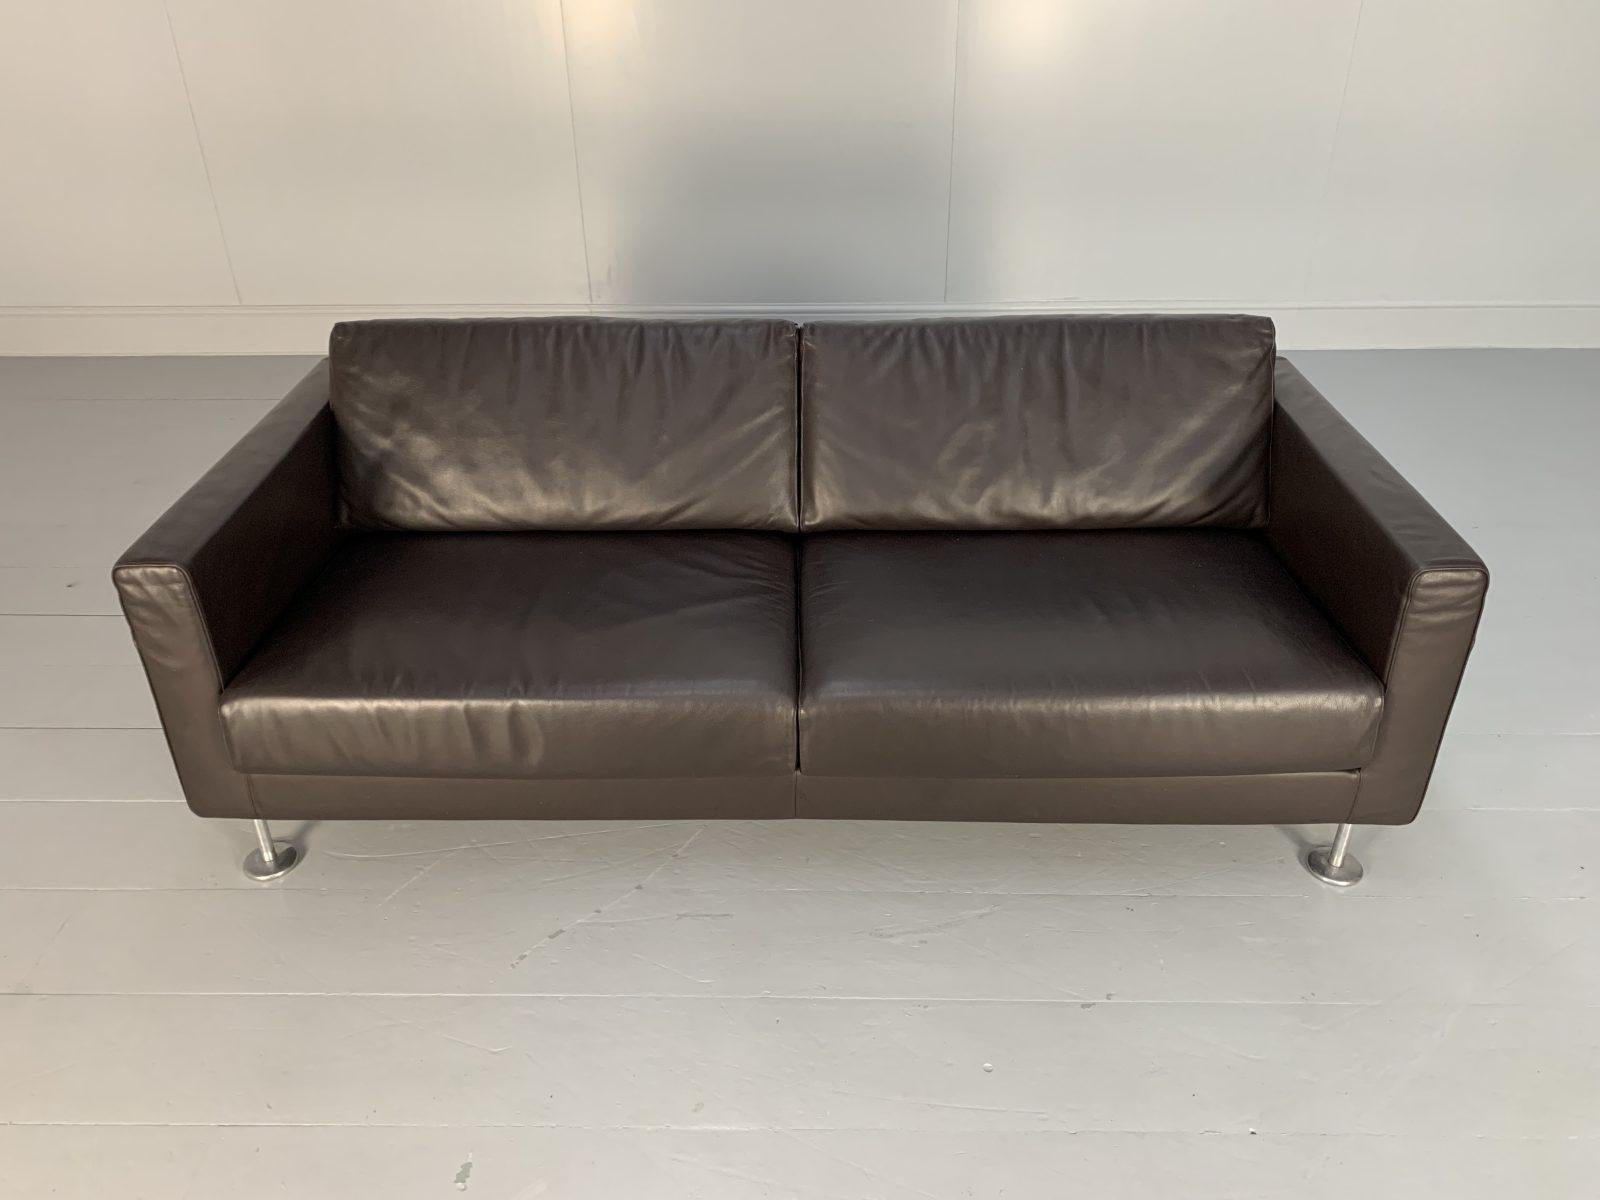 Vitra “Park” 2-Seat Sofa, in Dark Brown Leather For Sale 7